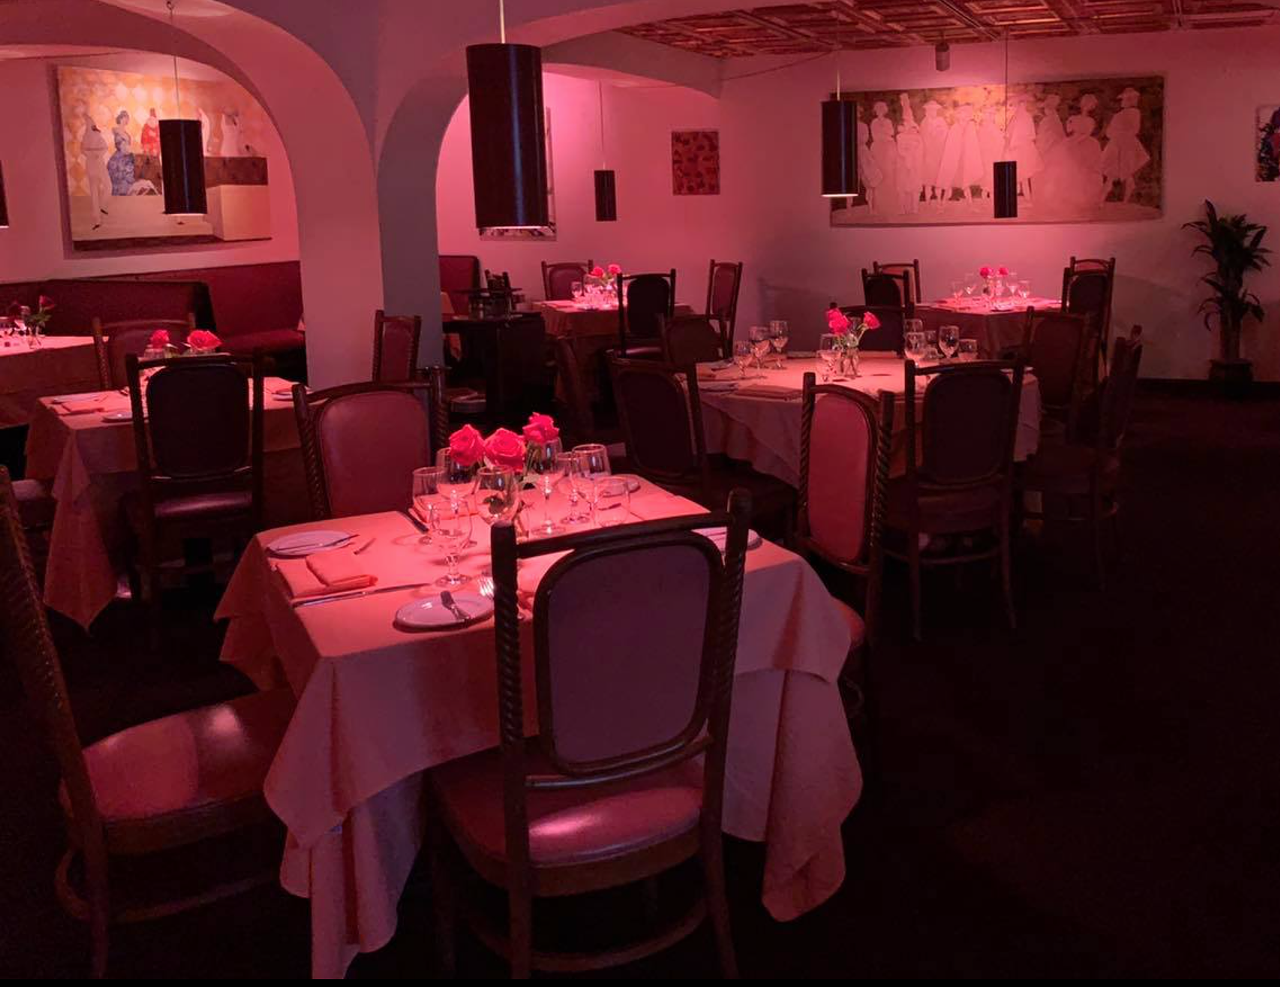 Donatello Italian Restaurant
232 N Dale Mabry Hwy., Tampa, 813-875-6660
The red lighting of the restaurant brings love and lust to the table with its authentic Italian cuisine with dishes like “Calamari Amalfitama,” “Capelli al Pomodoro” and “Medallion Napoletana.”
Photo via Donatello Italian Restaurant/Facebook